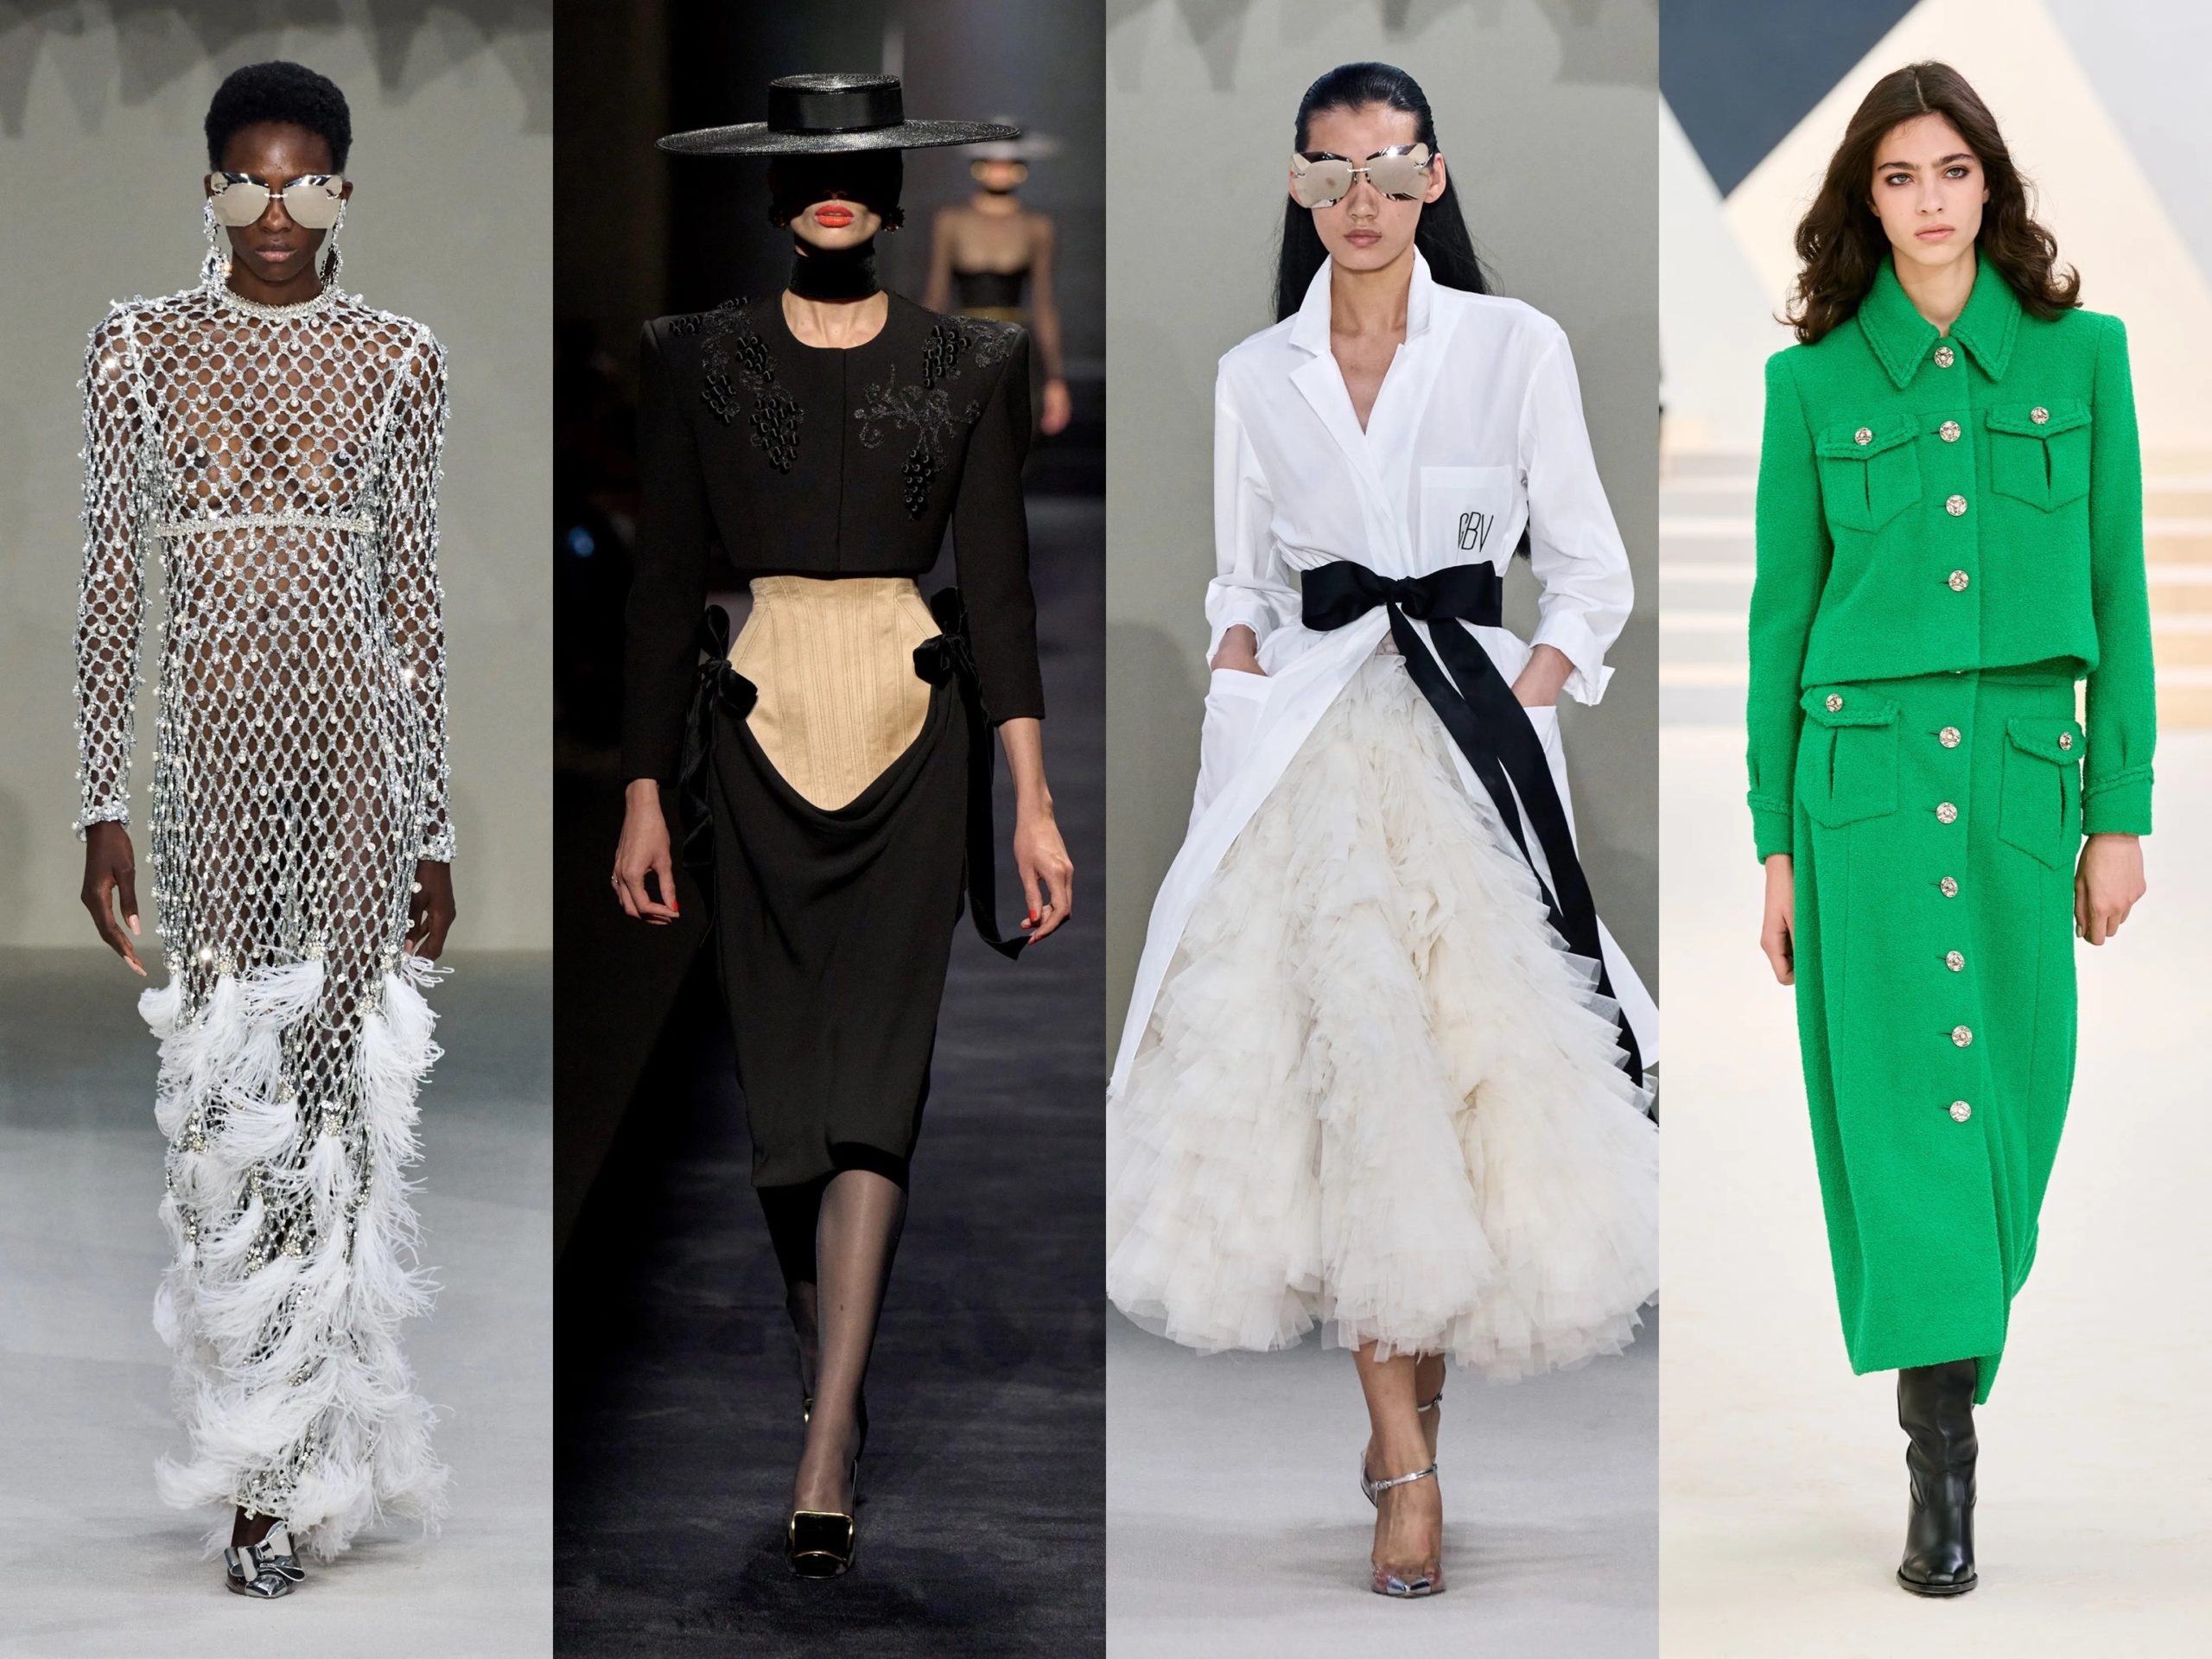 Vogue's best looks from the Chanel fall/winter 2022 show